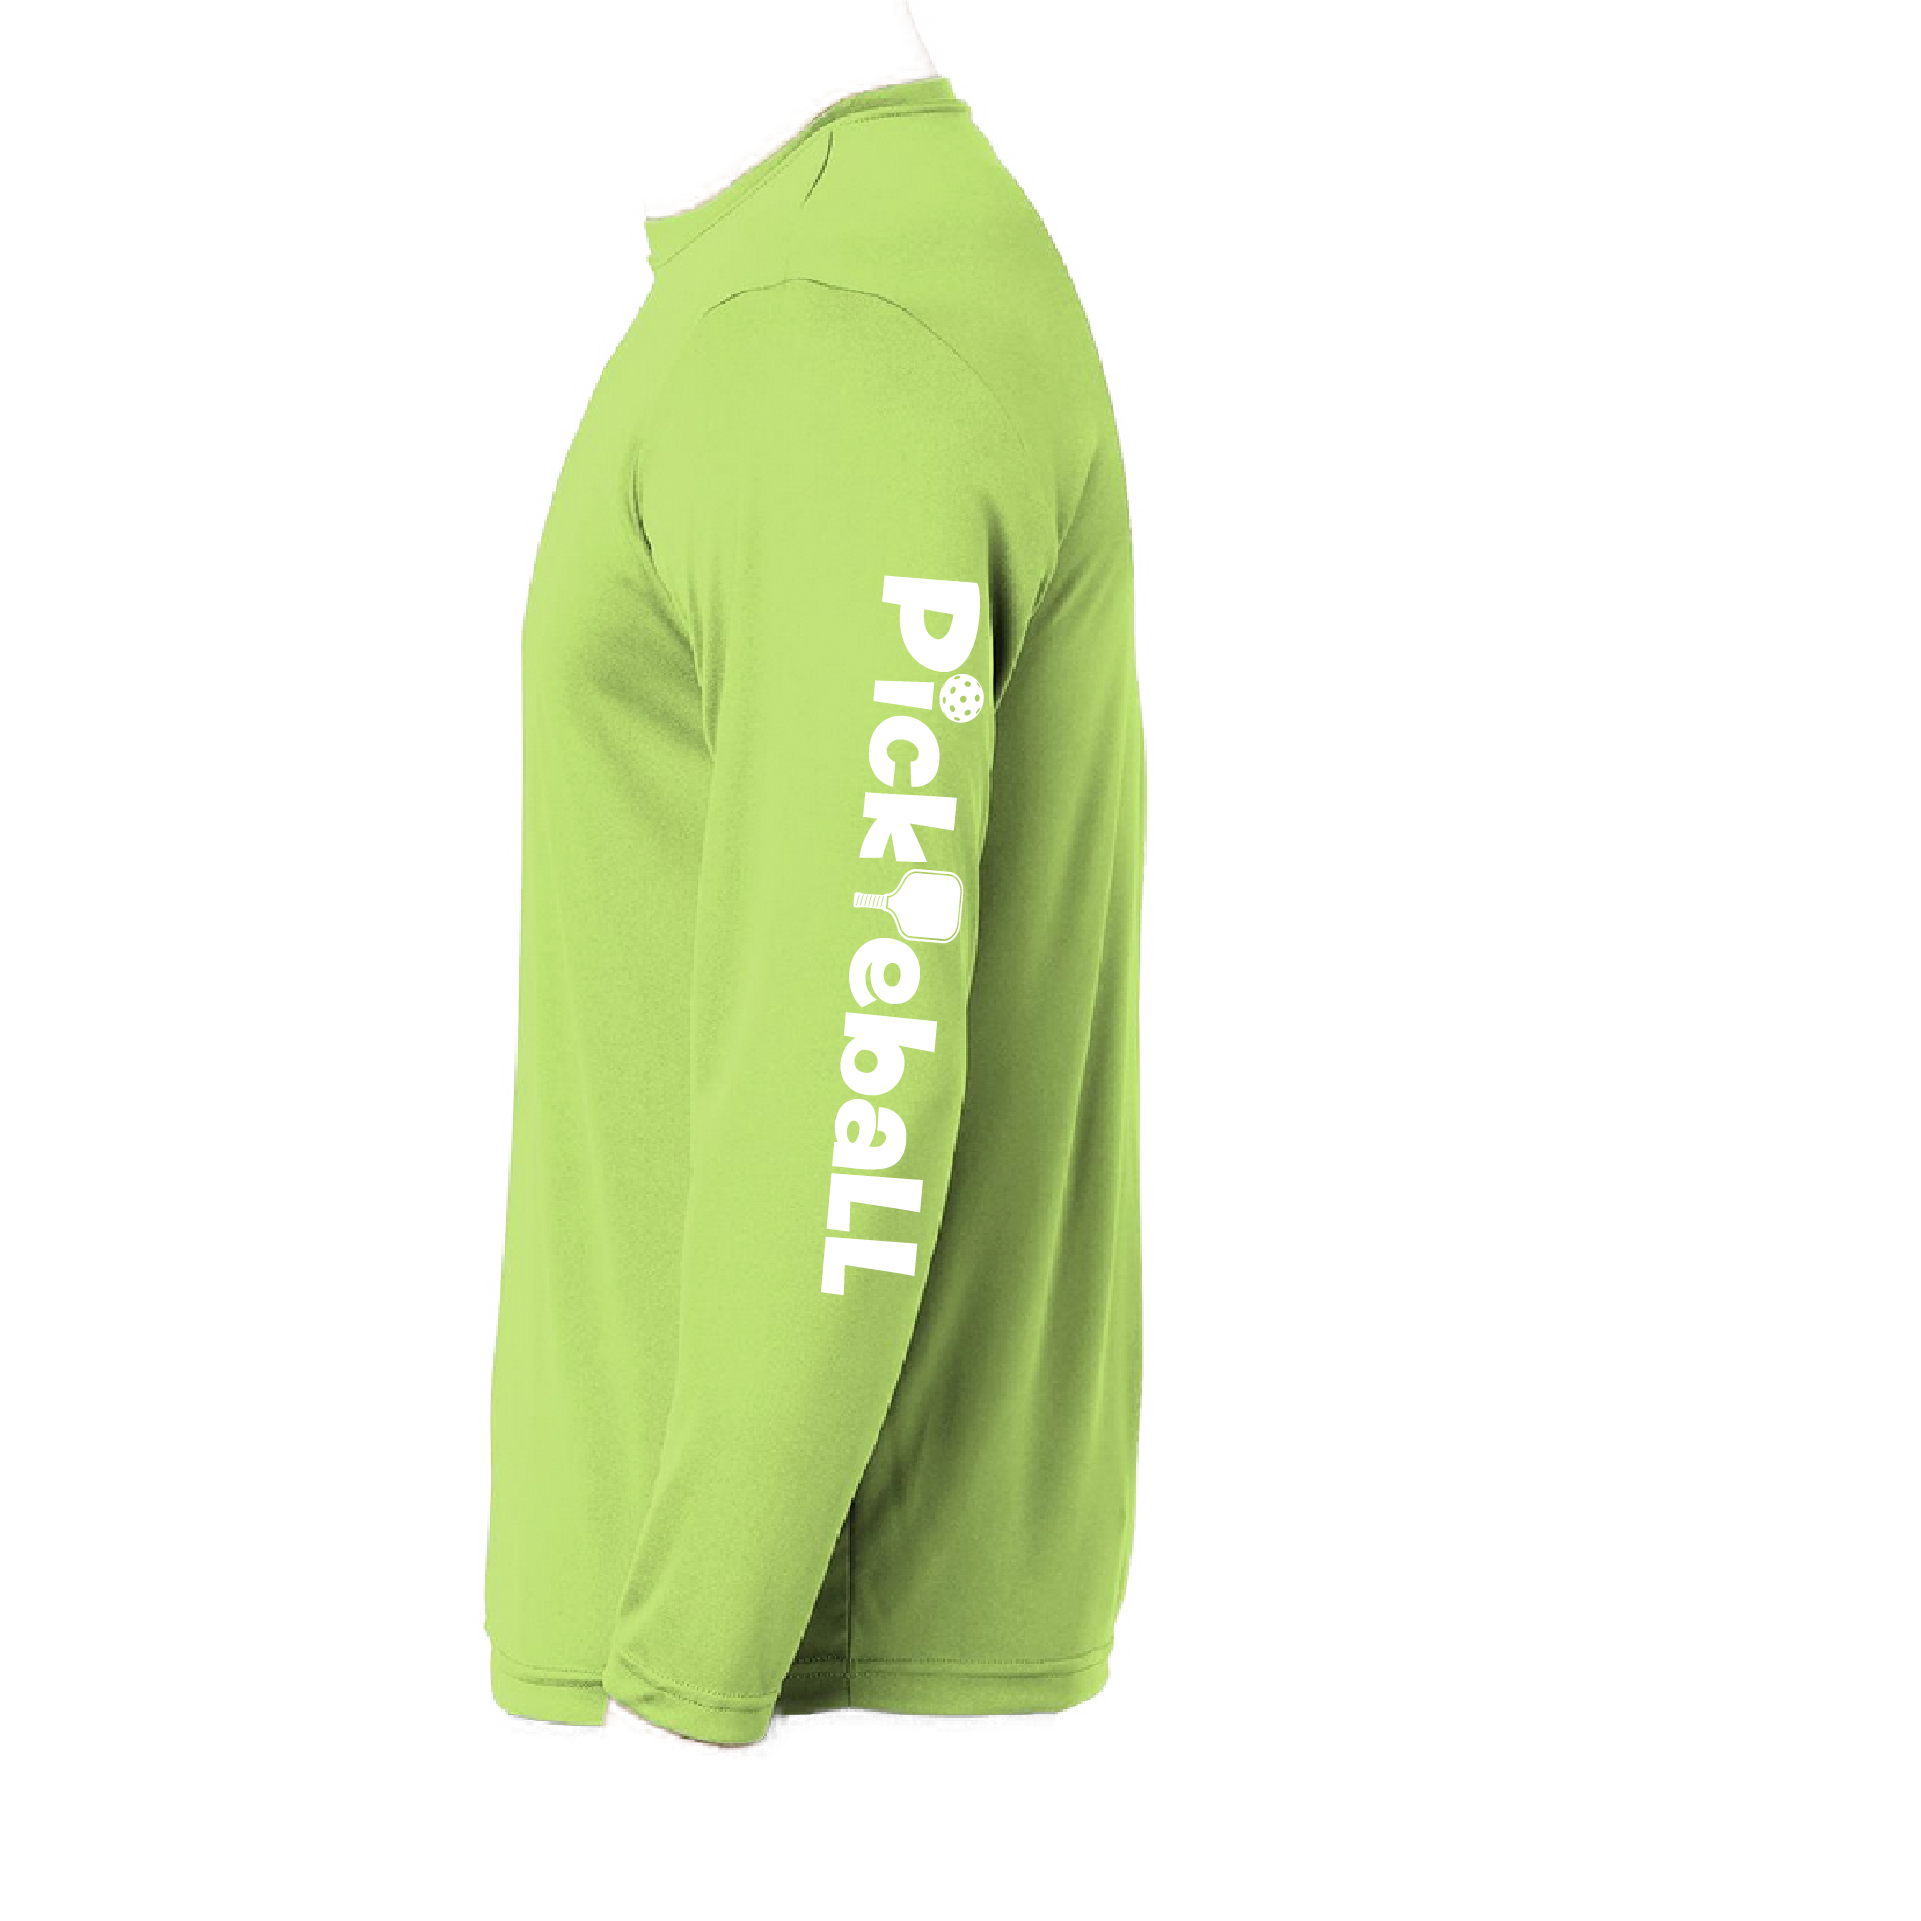 Pickleball Design: Pickleball (Horizontal) - Customizable Location  Youth Style: Long-Sleeve  Shirts are lightweight, roomy and highly breathable. These moisture-wicking shirts are designed for athletic performance. They feature PosiCharge technology to lock in color and prevent logos from fading. Removable tag and set-in sleeves for comfort.